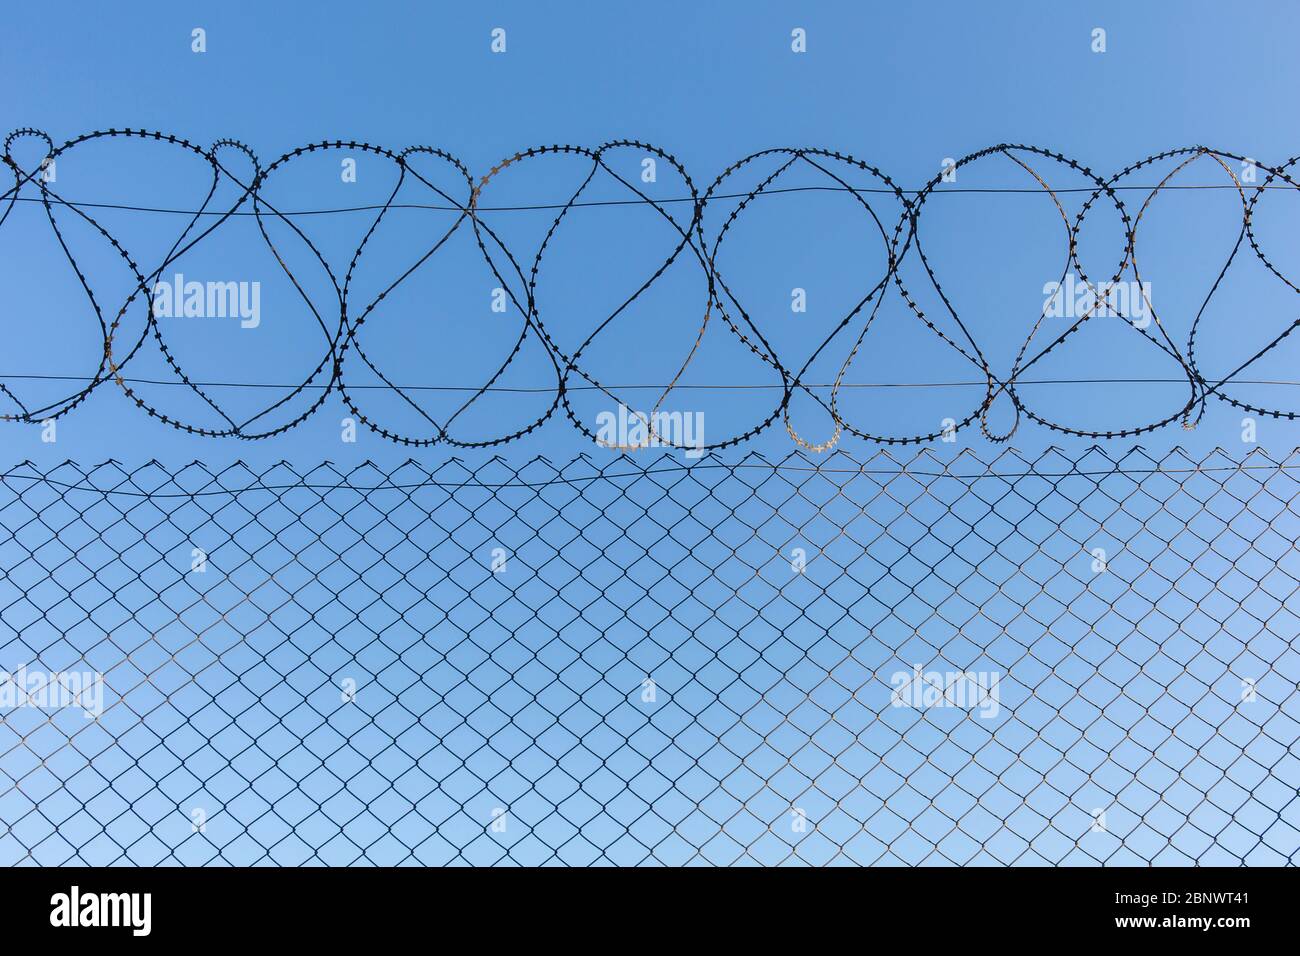 Barbed wires reinforced fence and sky. Stock Photo